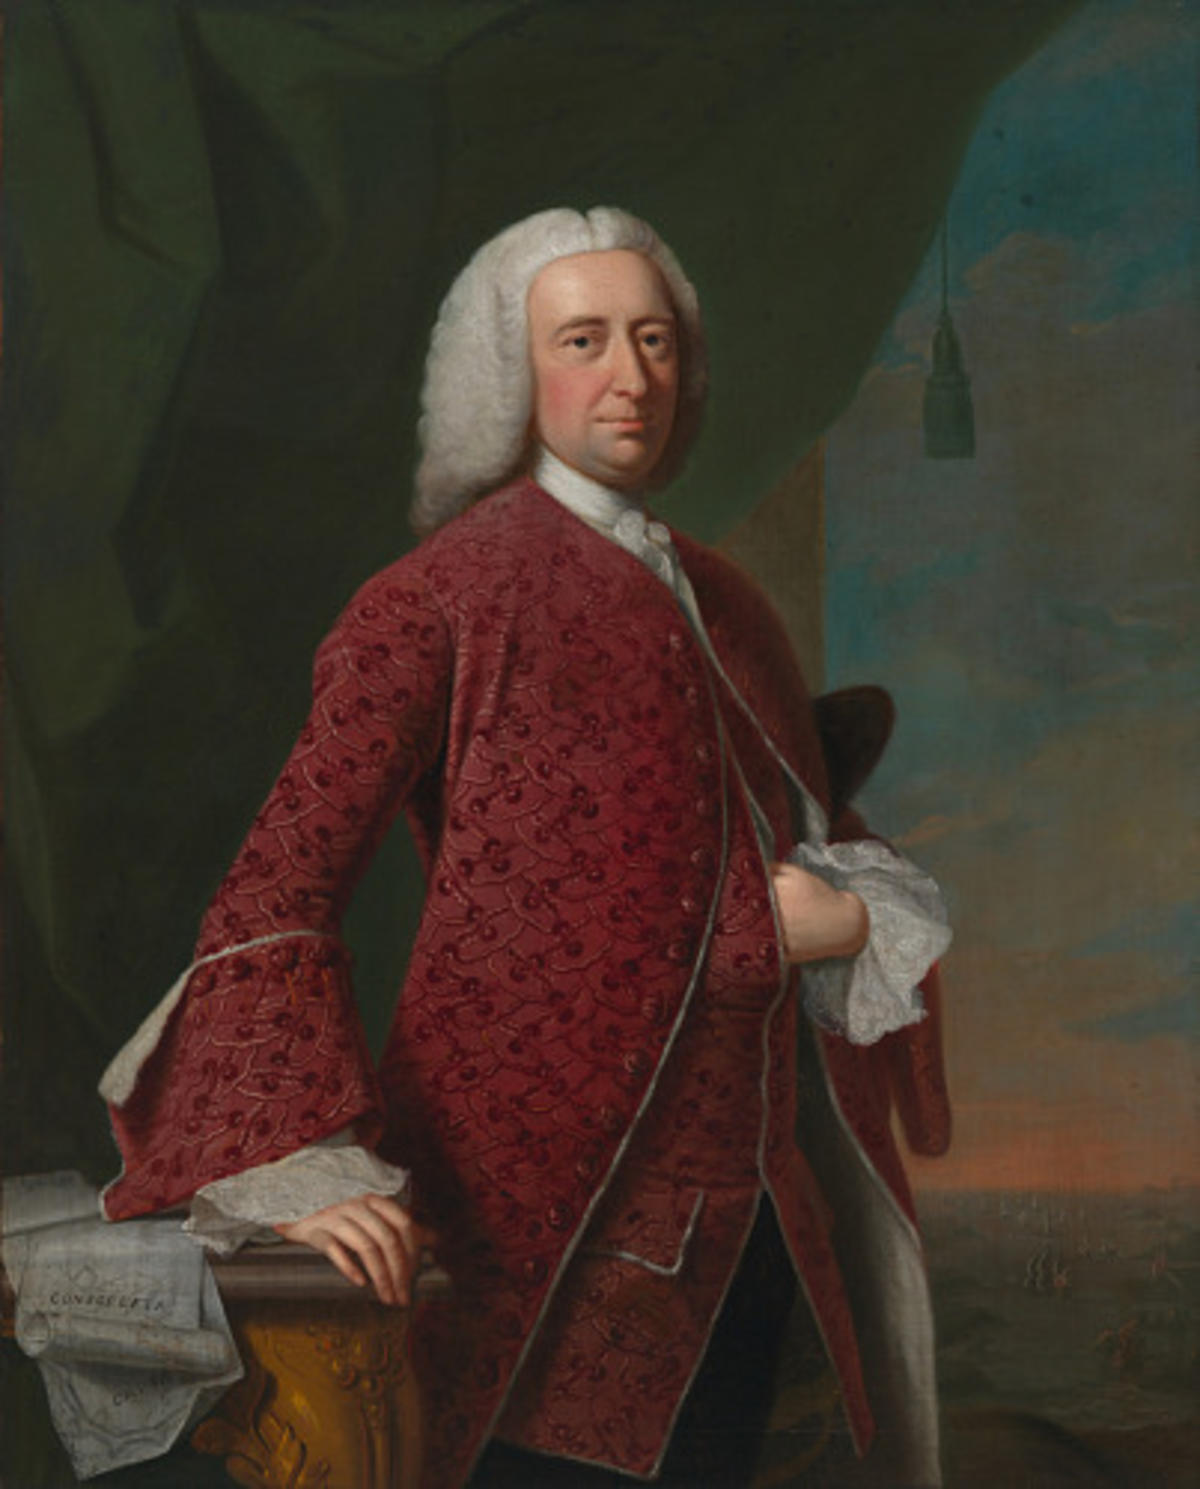 A painting of a man in a white curly wig and a red frock coat.